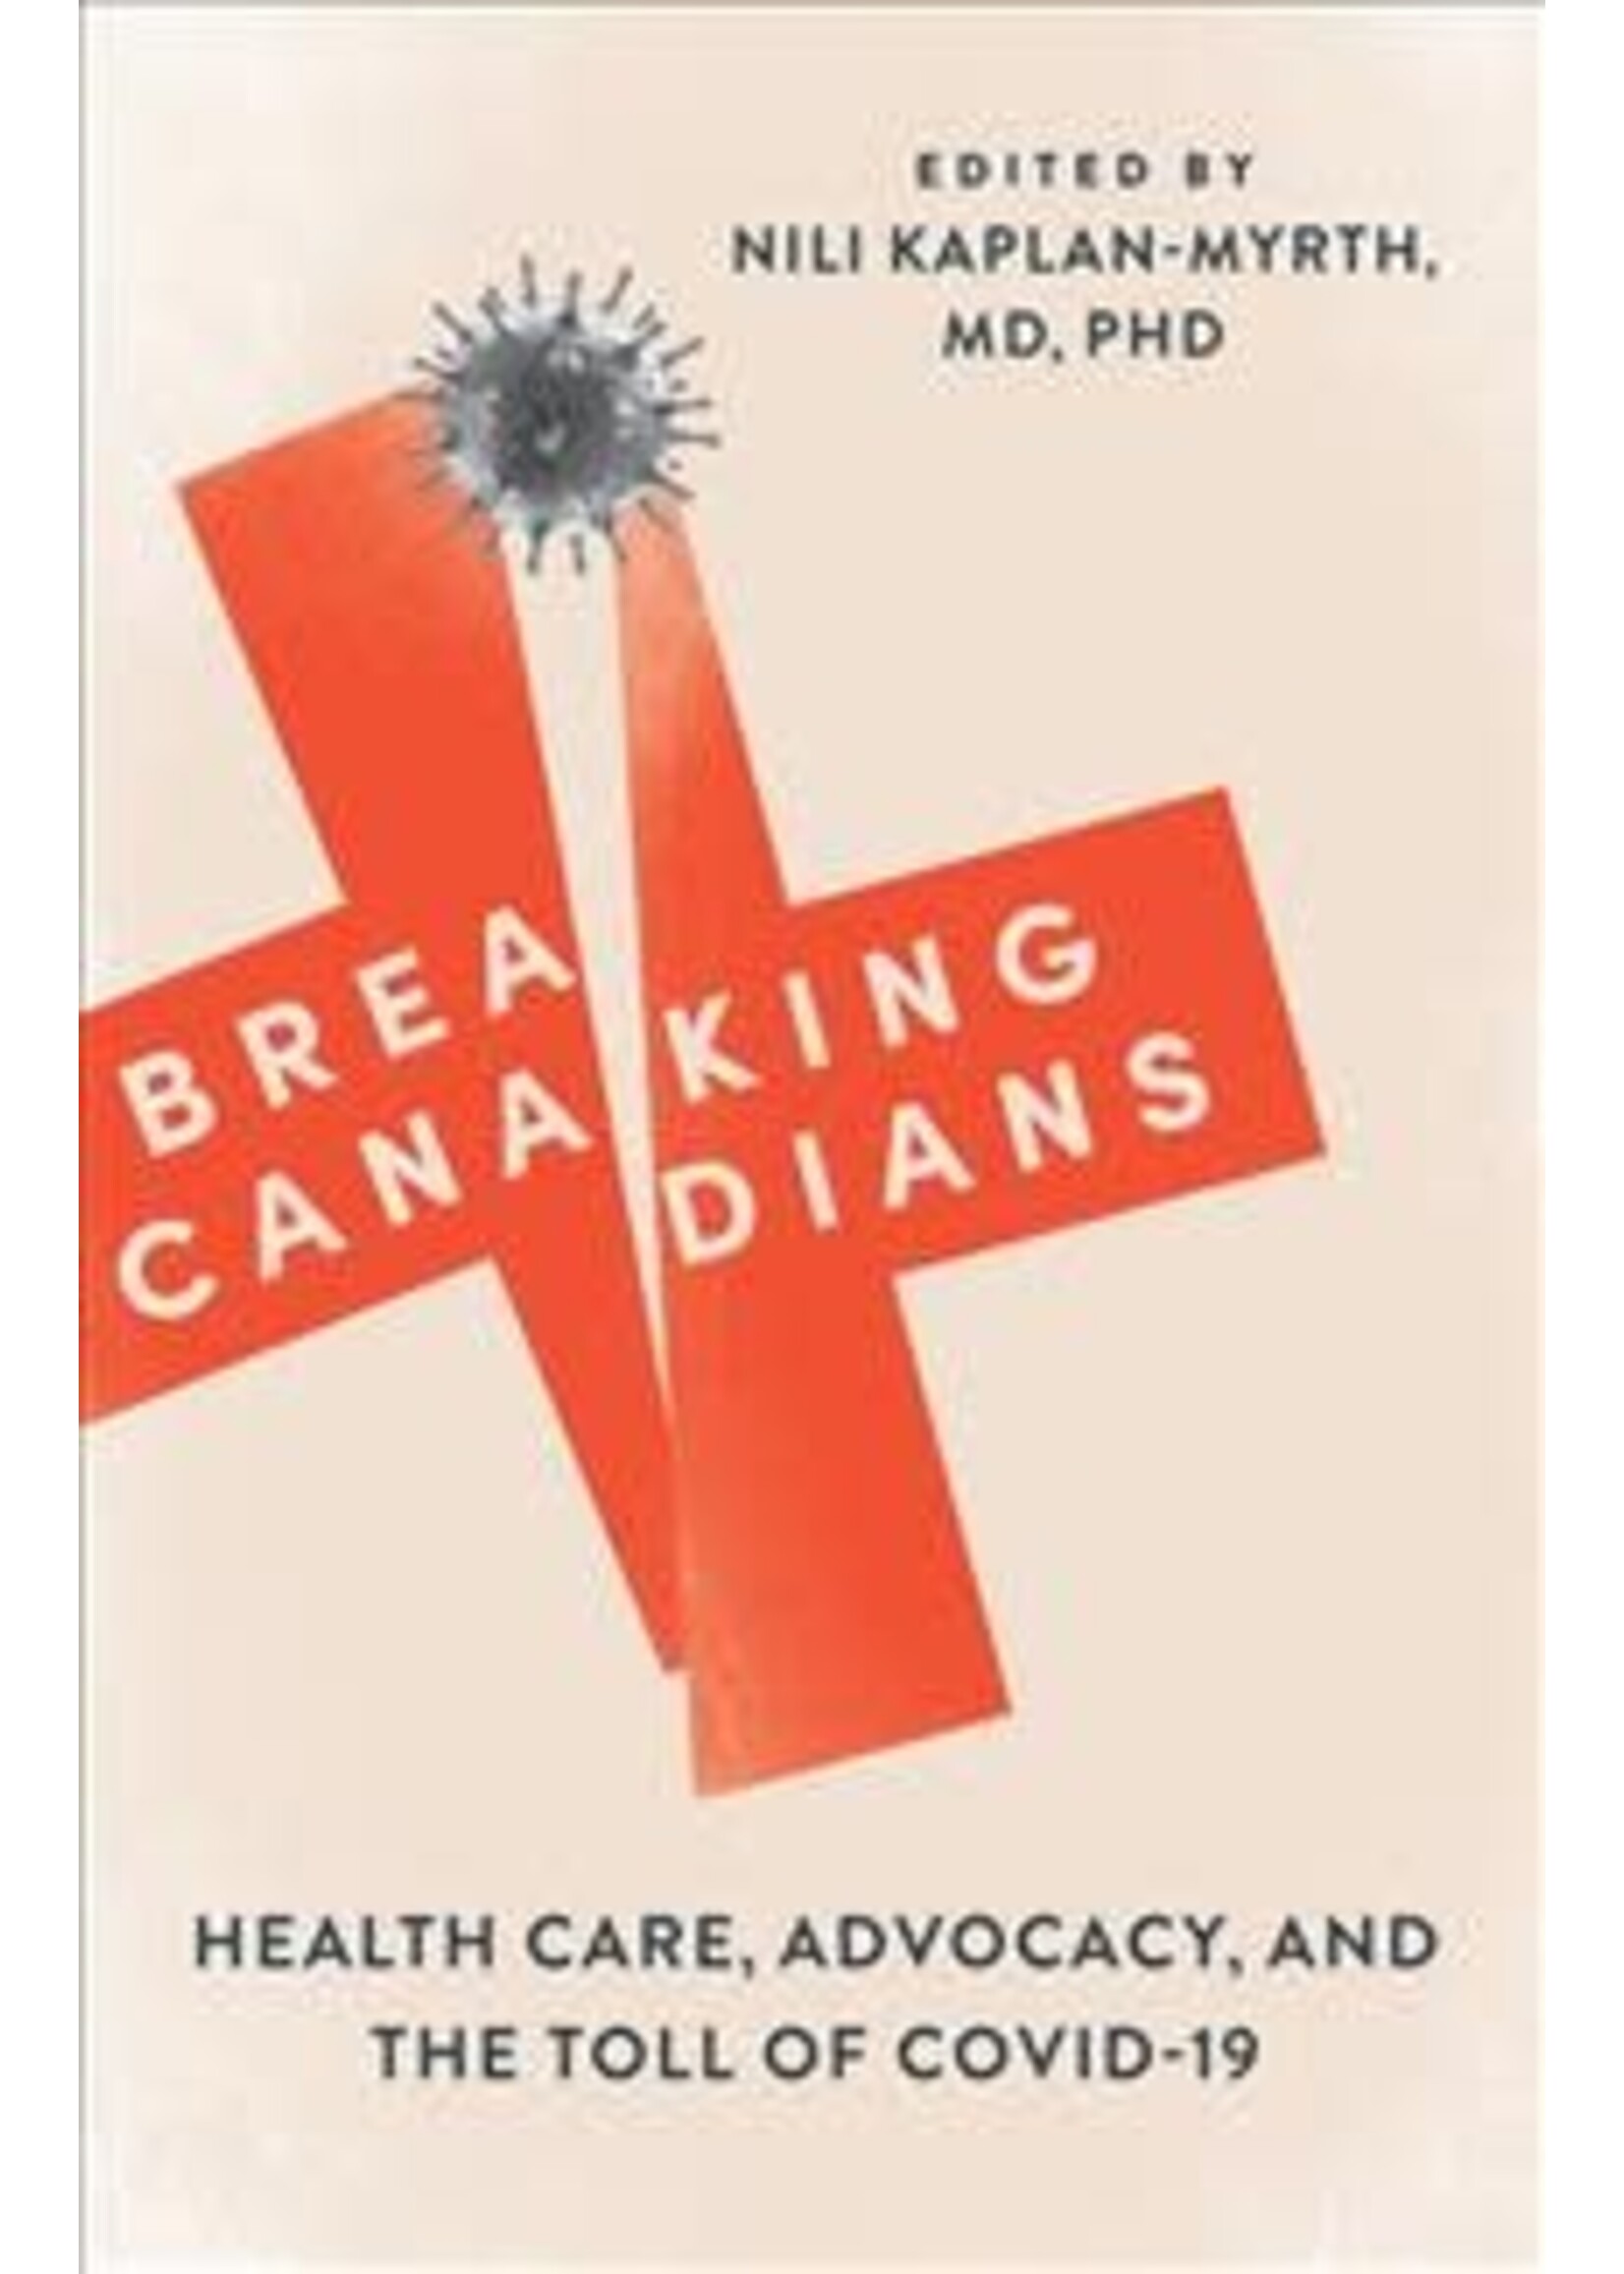 Breaking Canadians: Health Care, Advocacy, and the Toll of COVID-19 by Nili Kaplan-Myrth